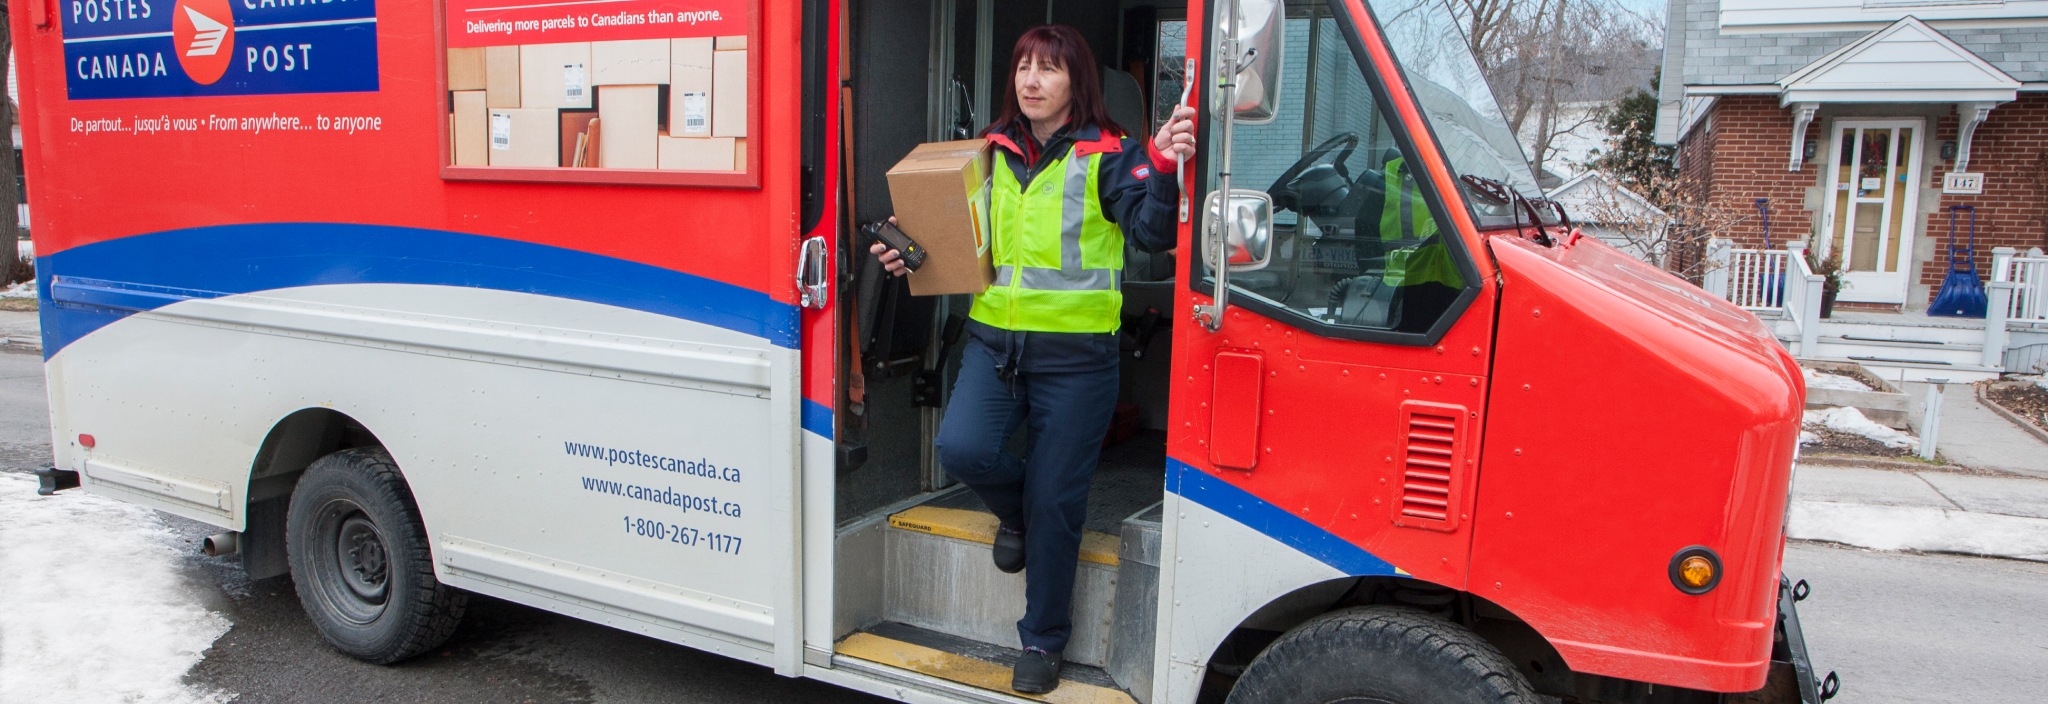 Delivery agent stepping out of a Canada Post truck in a residential neighbourhood to deliver a package